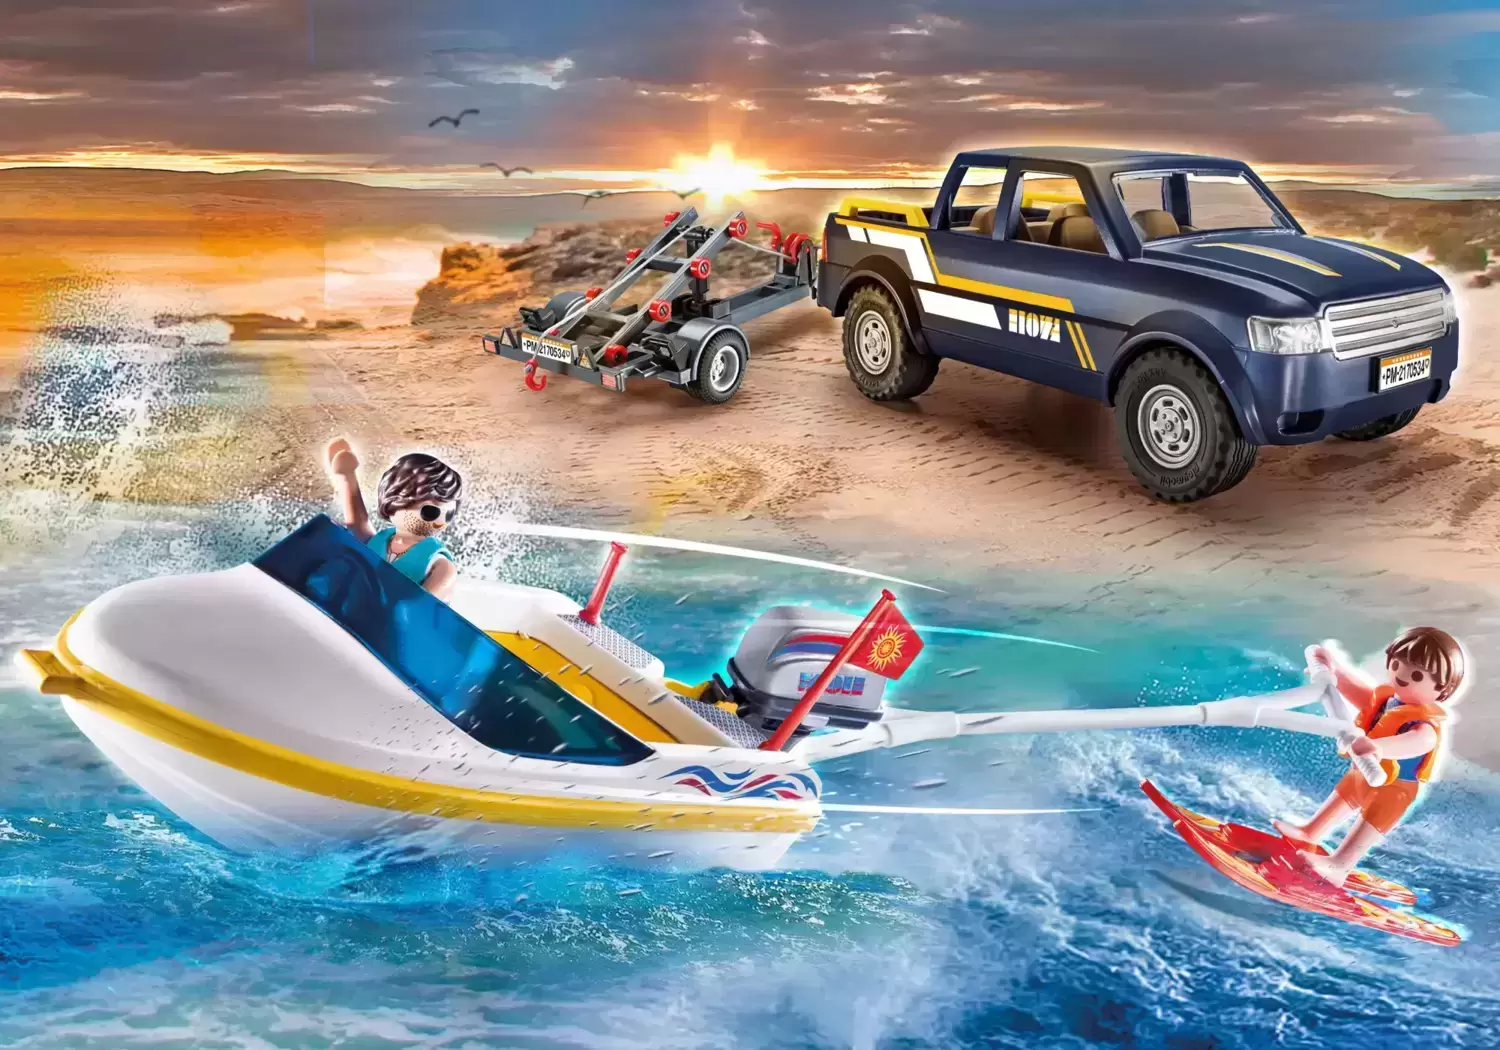 Playmobil on Hollidays - Pick Up with Speedboat